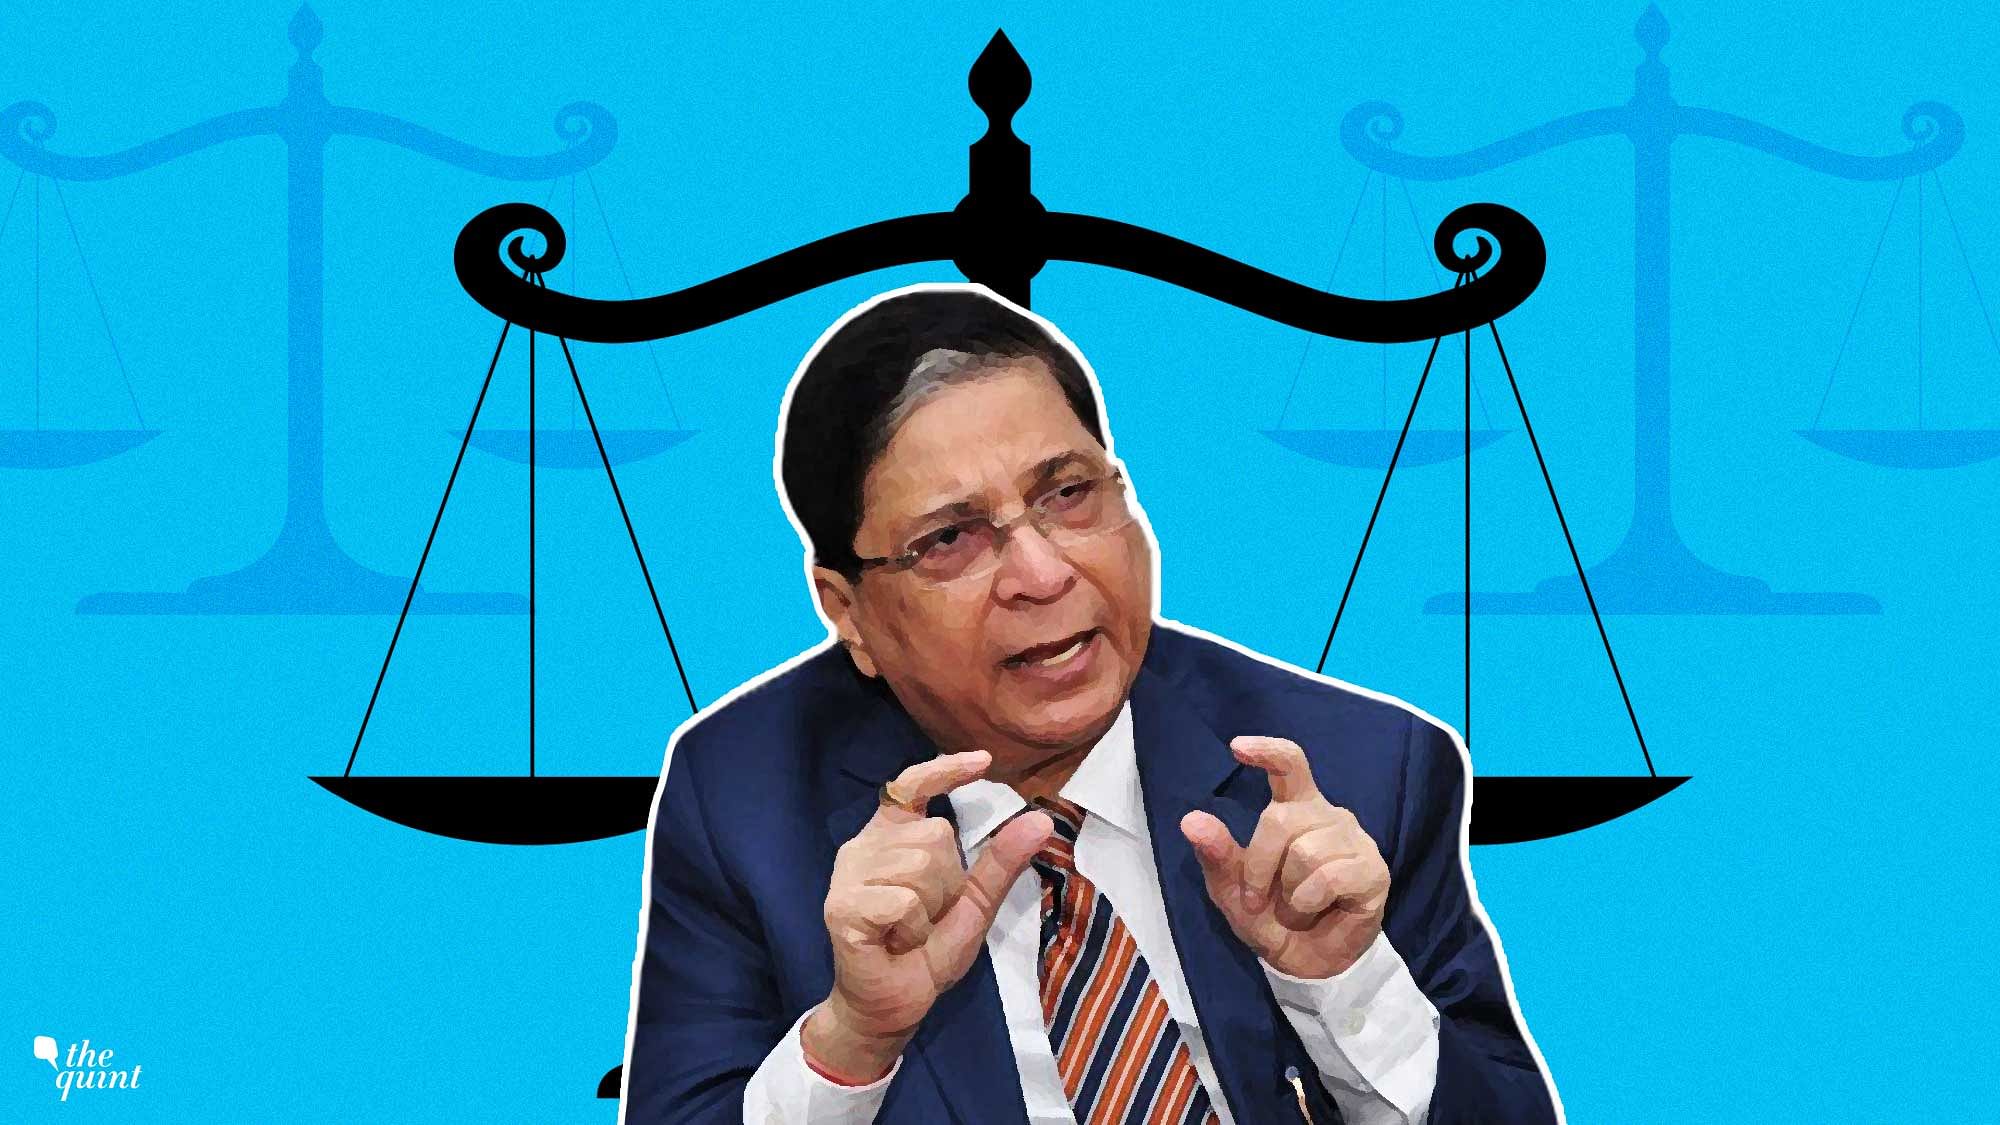 Four senior judges of the Supreme Court have written to CJI Dipak Misra expressing concerns about the functioning of the court.